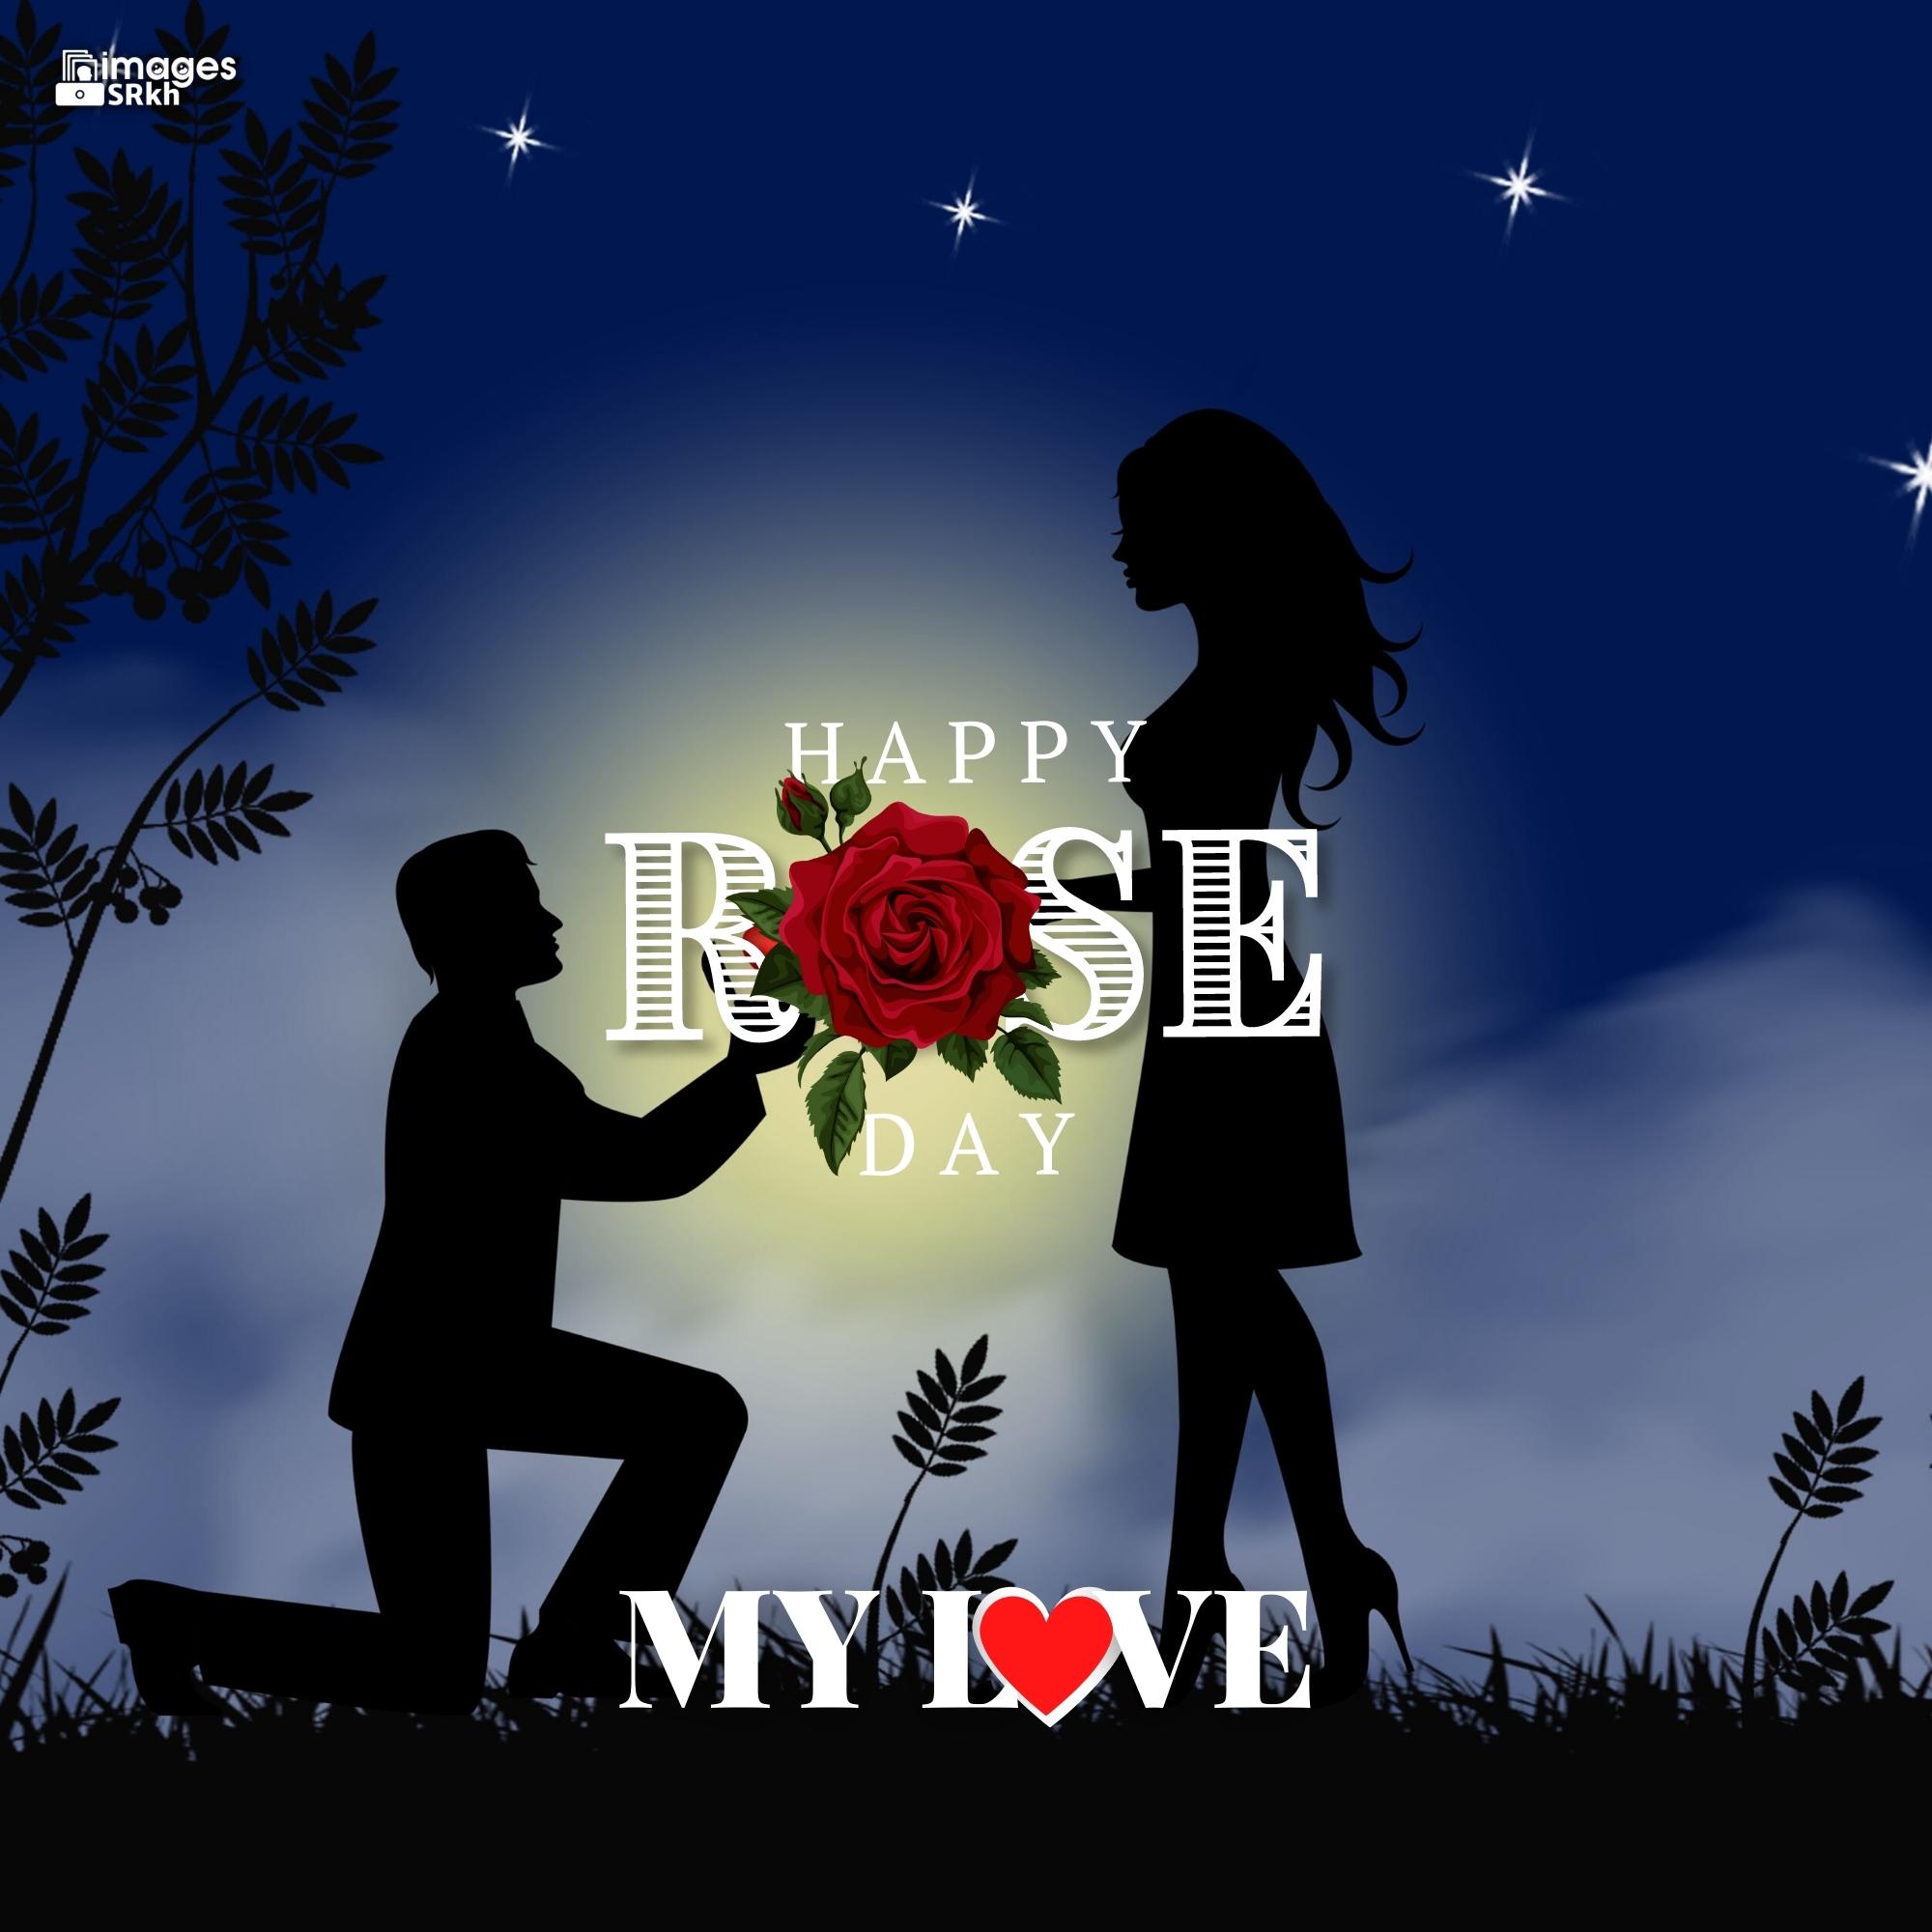 Happy Rose Day My Love (24) | HD IMAGES